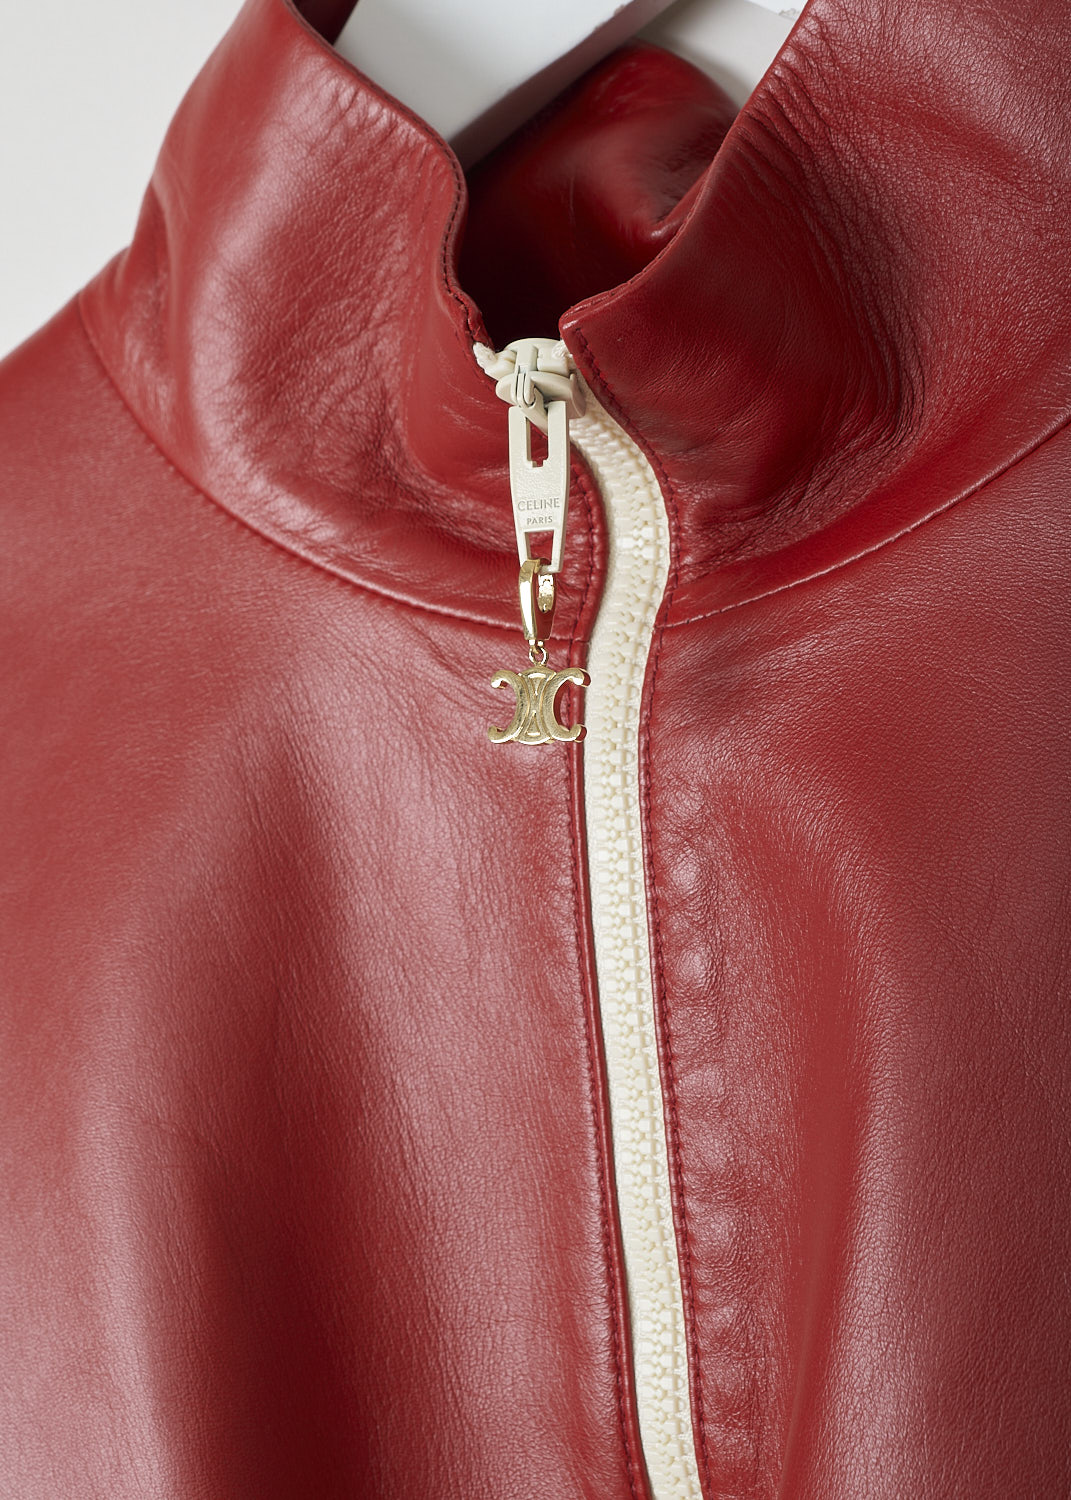 CELINE, TWO-TONE CROPPED LEATHER JACKET, 150T_2EE13_27LV, Red, Beige, Detail, This cropped leather jacket is  two-toned, with the top half in lipstick red and the bottom half and the back in off-white. The jacket has a stand-up collar, two patch pockets with flap and a zipper in a matching off-white color. The gold-tone pull-tab is shaped in the brand's logo. The long sleeves have elasticated cuffs. The elasticated hemline has gold-tone cord locks on the inside. The jackets has a single inner pocket

